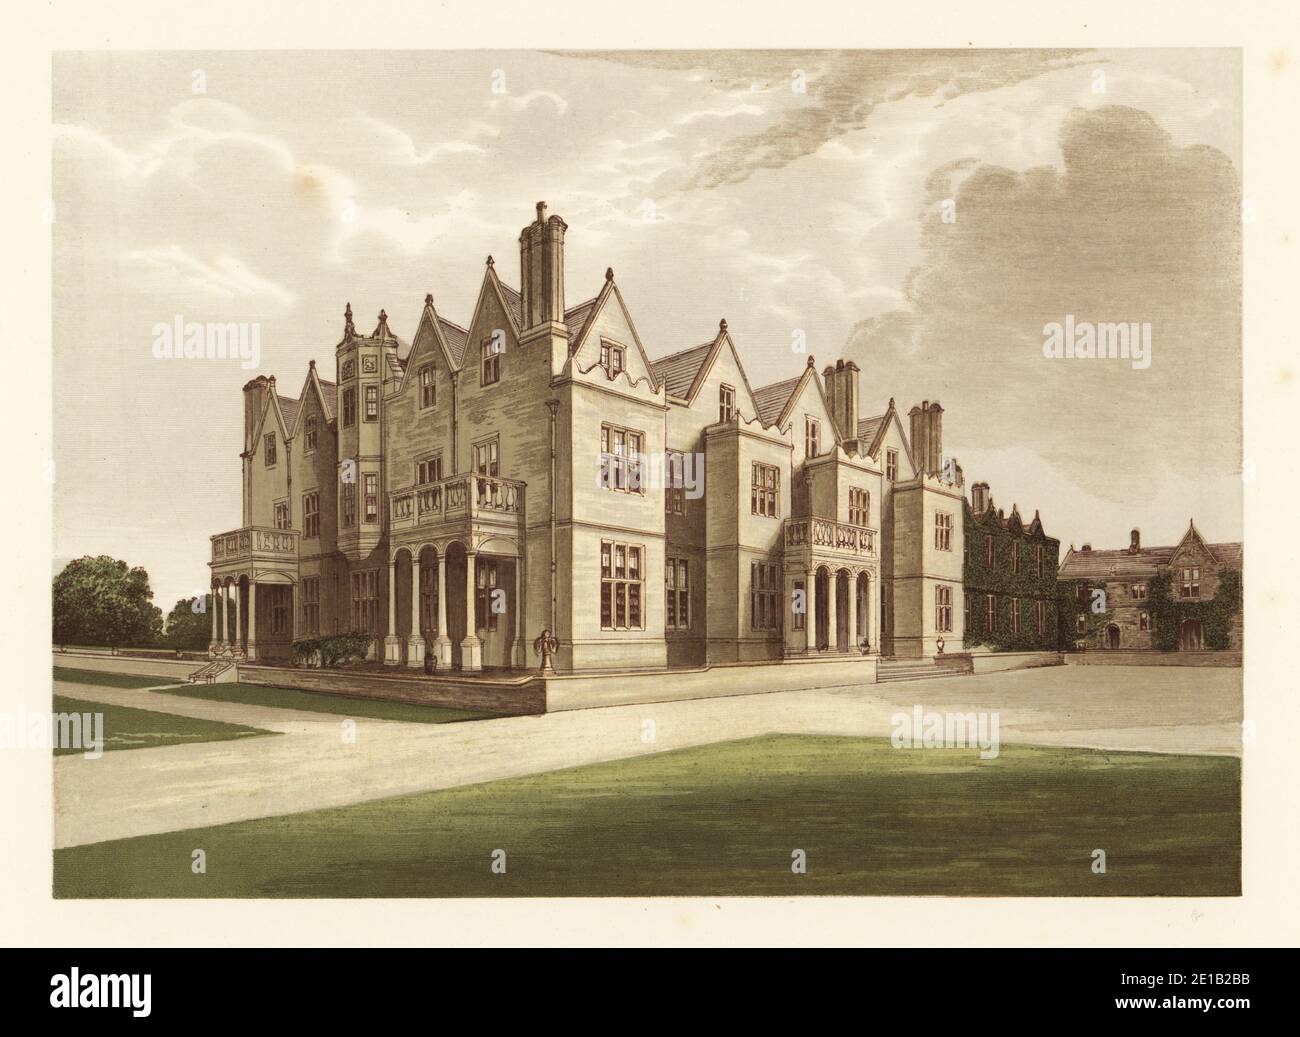 Acton Reynald Hall., Shropshire, England. Neo-Jacobean style mansion, retaining the original Elizabethan Tuscan portico, built by John Hiram Haycock for Sir Andrew Corbet. Colour woodblock by Benjamin Fawcett in the Baxter process of an illustration by Alexander Francis Lydon from Reverend Francis Orpen Morris’s Picturesque Views of the Seats of Noblemen and Gentlemen of Great Britain and Ireland, William Mackenzie, London, 1880. Stock Photo